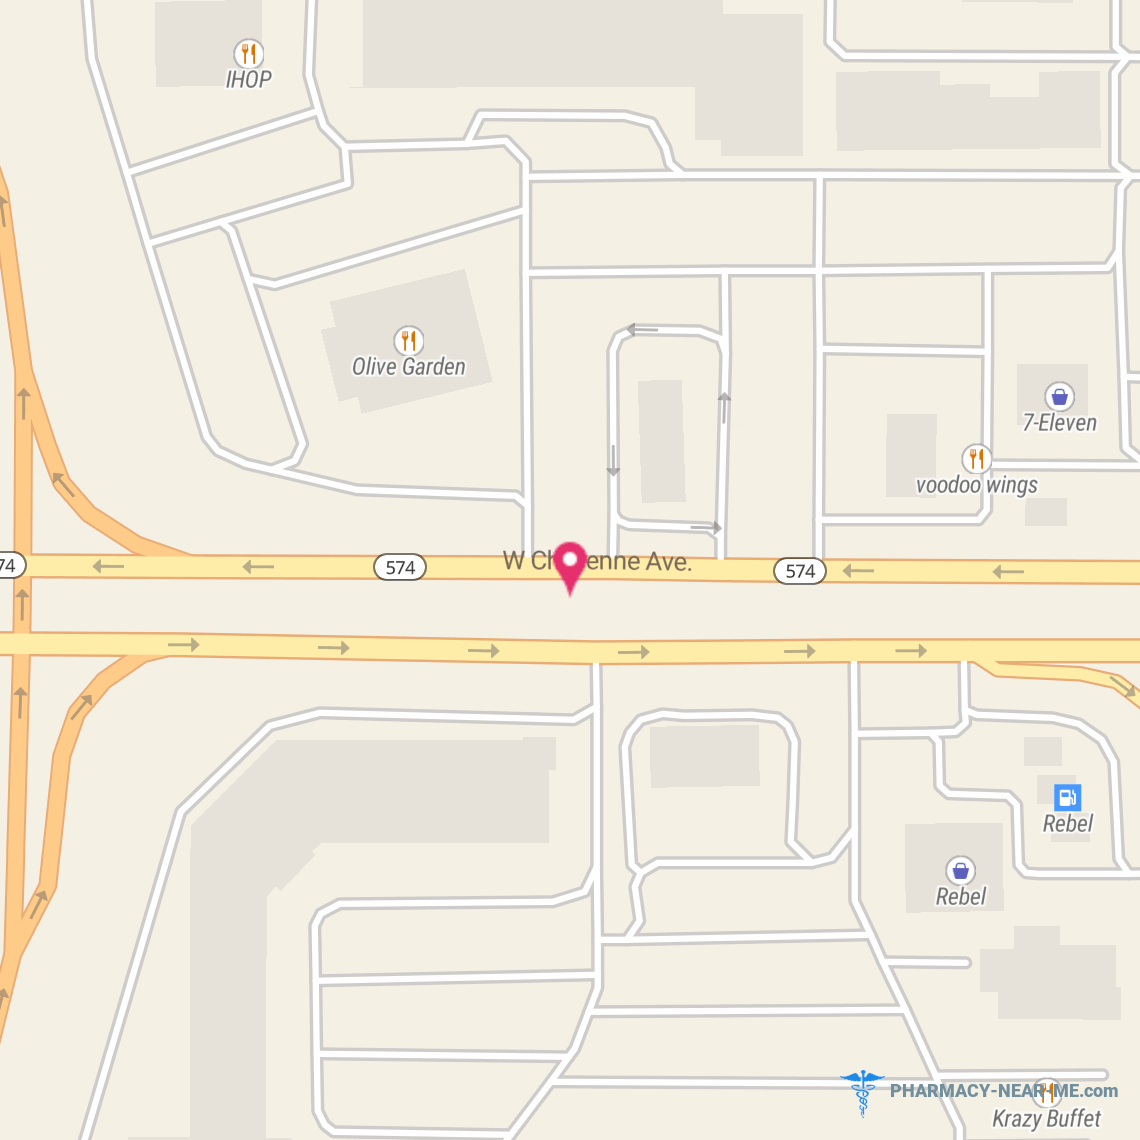 DOLCRX - Pharmacy Hours, Phone, Reviews & Information: 6820 West Cheyenne Avenue, Las Vegas, Nevada 89108, United States